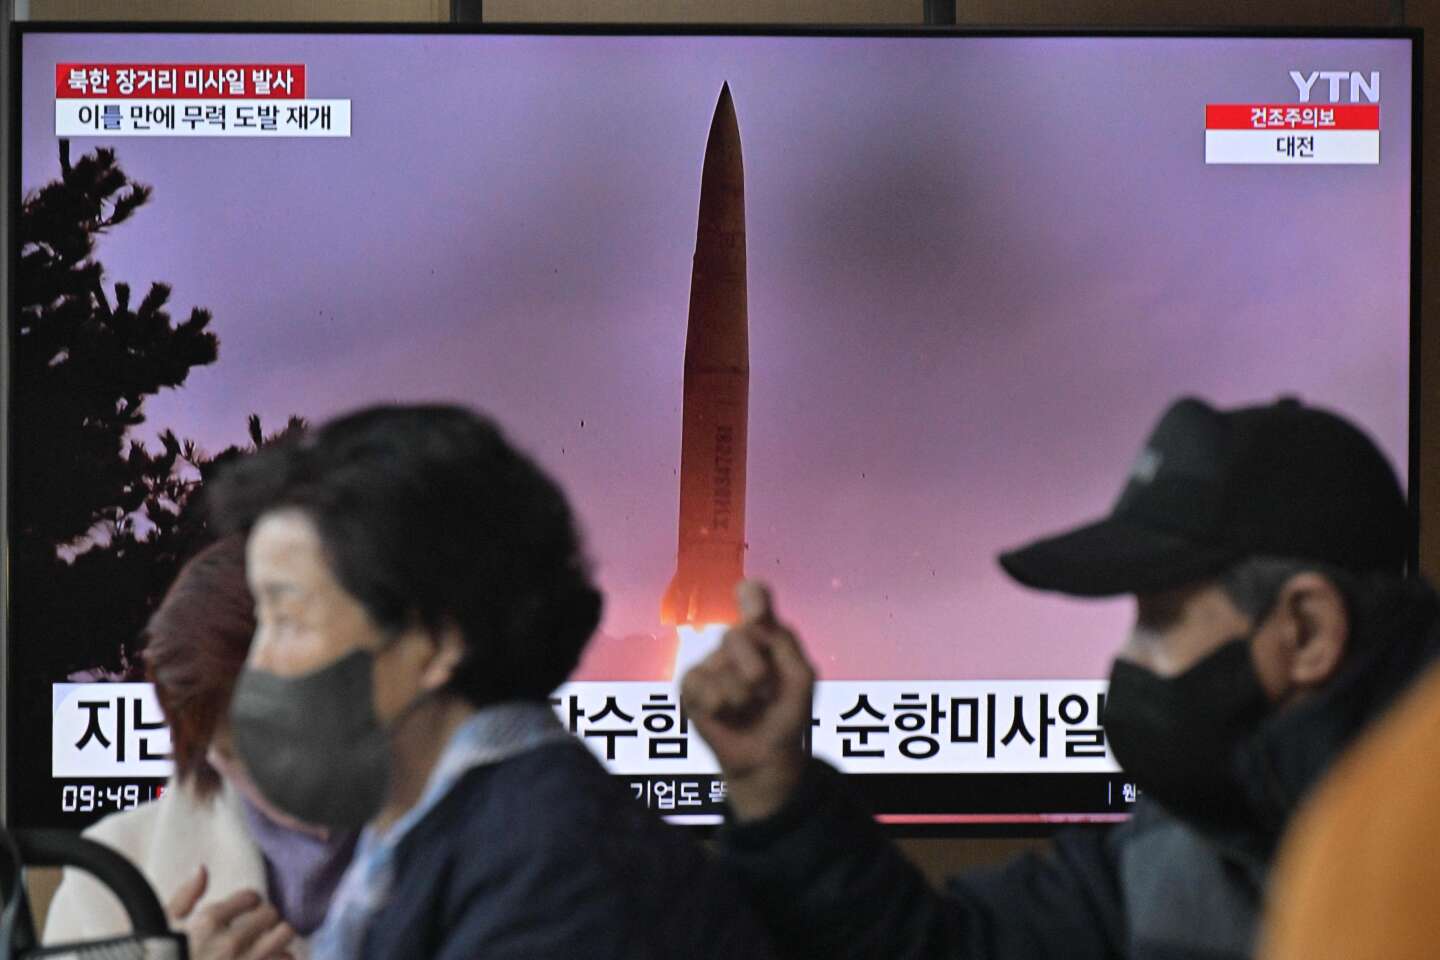 North Korea launched an intercontinental ballistic missile on the day of the South Korean president’s visit to Japan